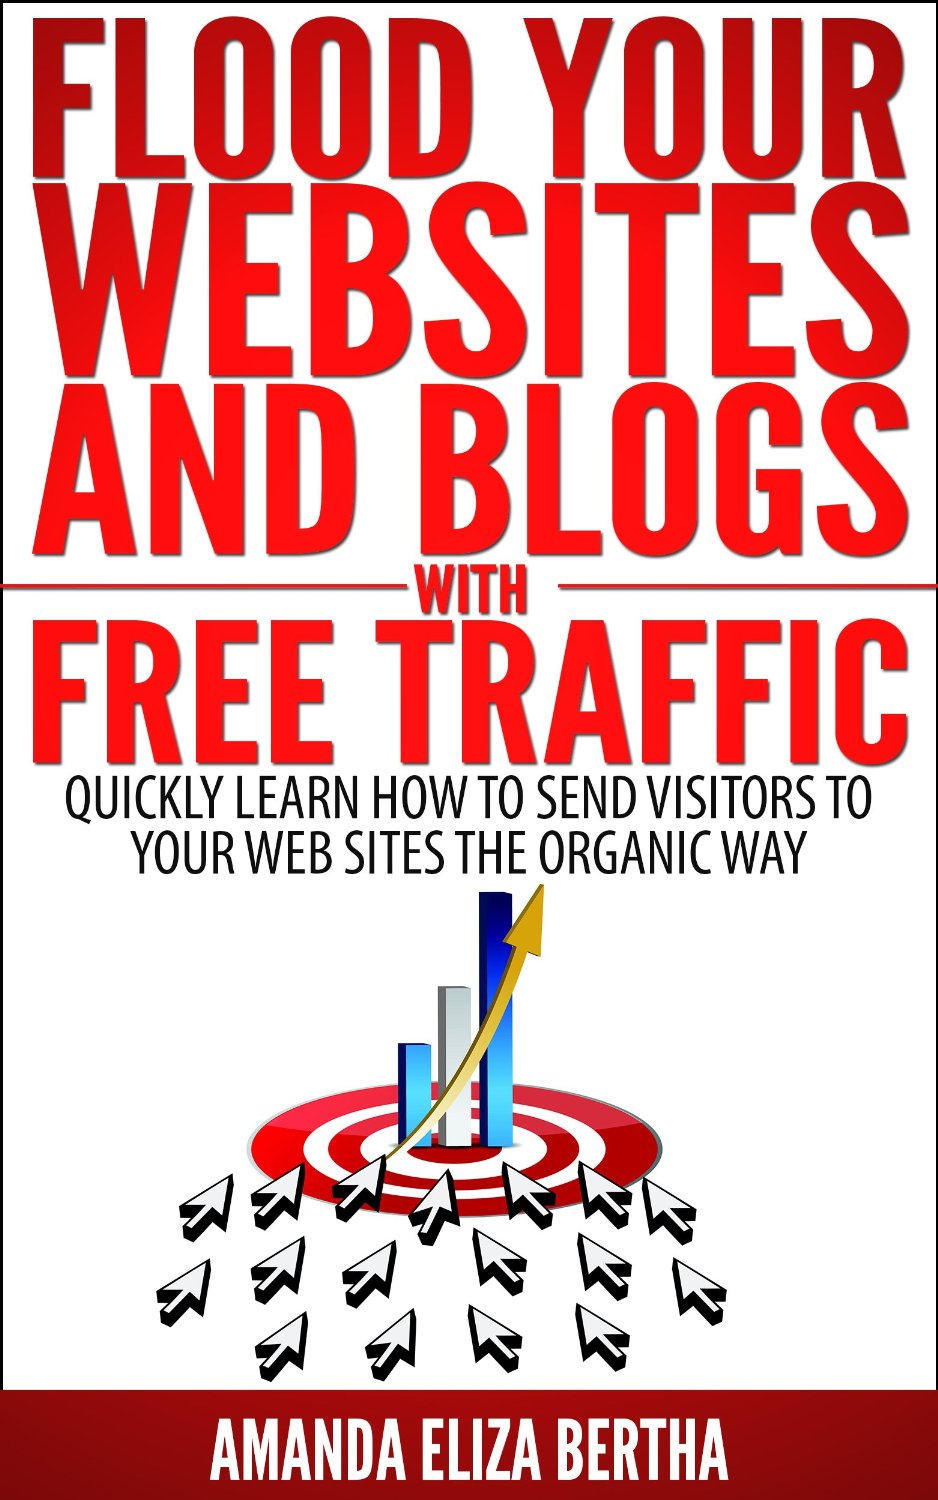 Flood Your Websites and Blogs with Free Traffic: Quickly Learn How to Send Visitors to Your Web Sites the Organic Way by Amanda Eliza Bertha